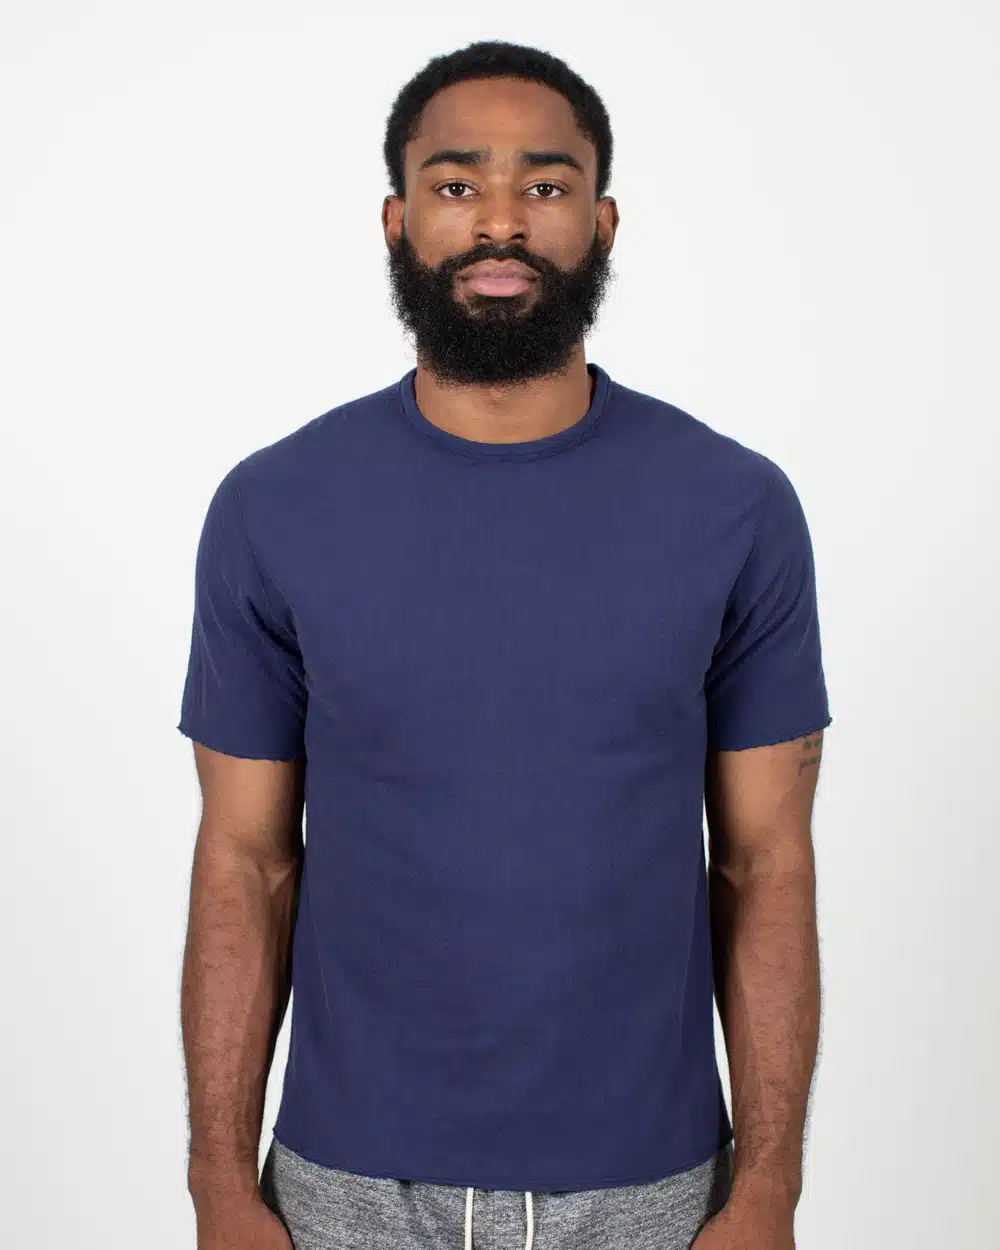 Loop & Weft Dual Layered Knit Raw Edge Crewneck - French Navy Blue